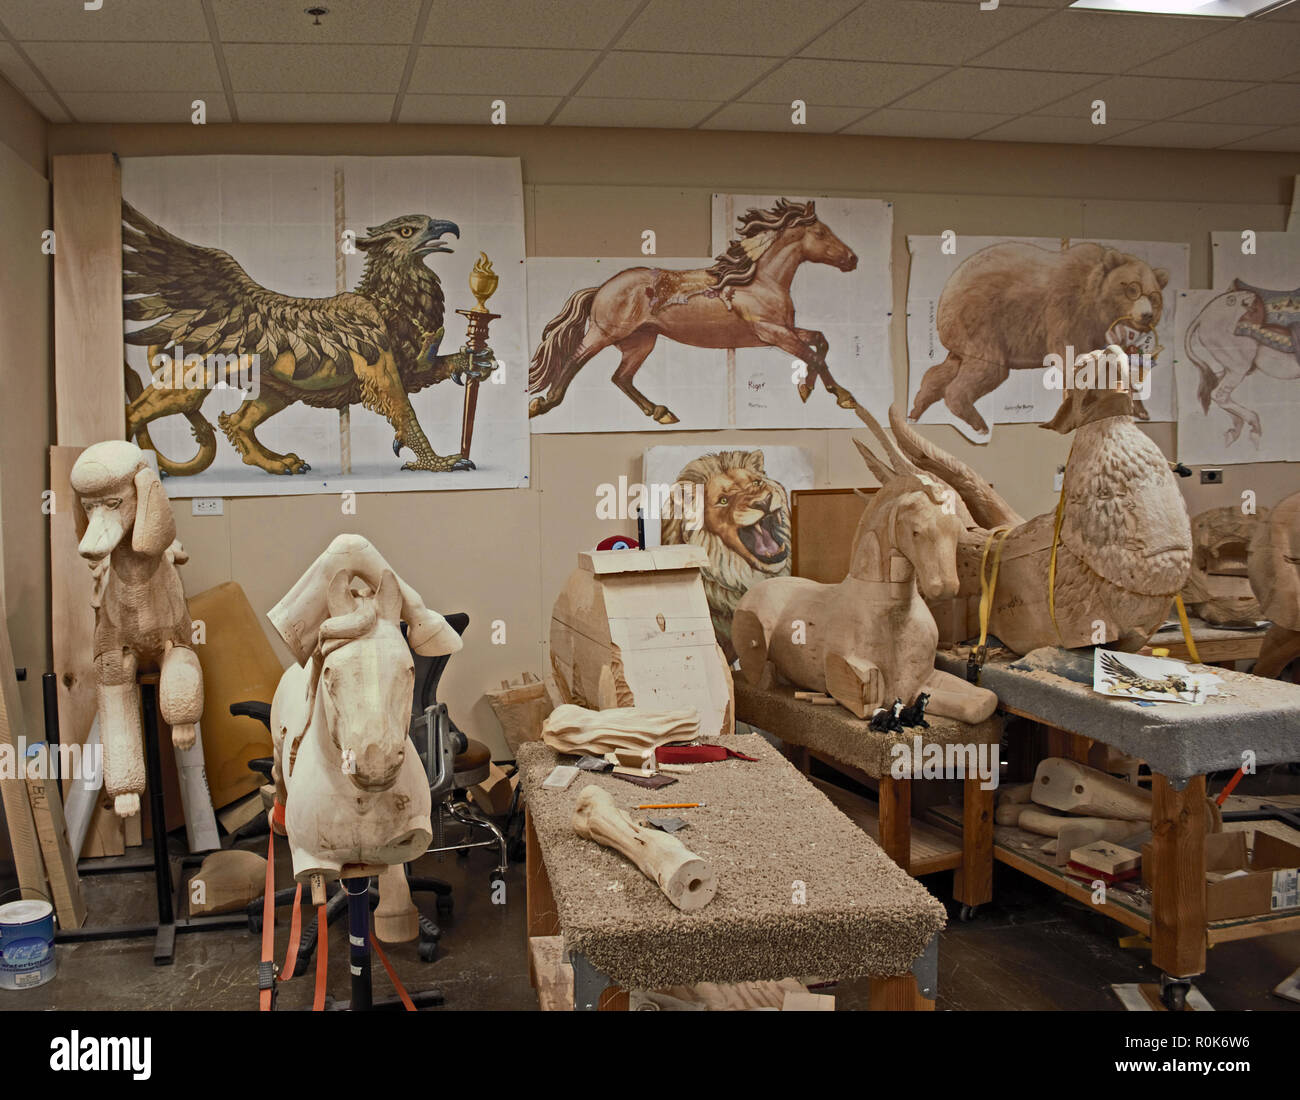 Carousel animals in the making. It's a long process as each one is carved by hand by master woodcarvers. Artist color renditions hang on the wall. Stock Photo